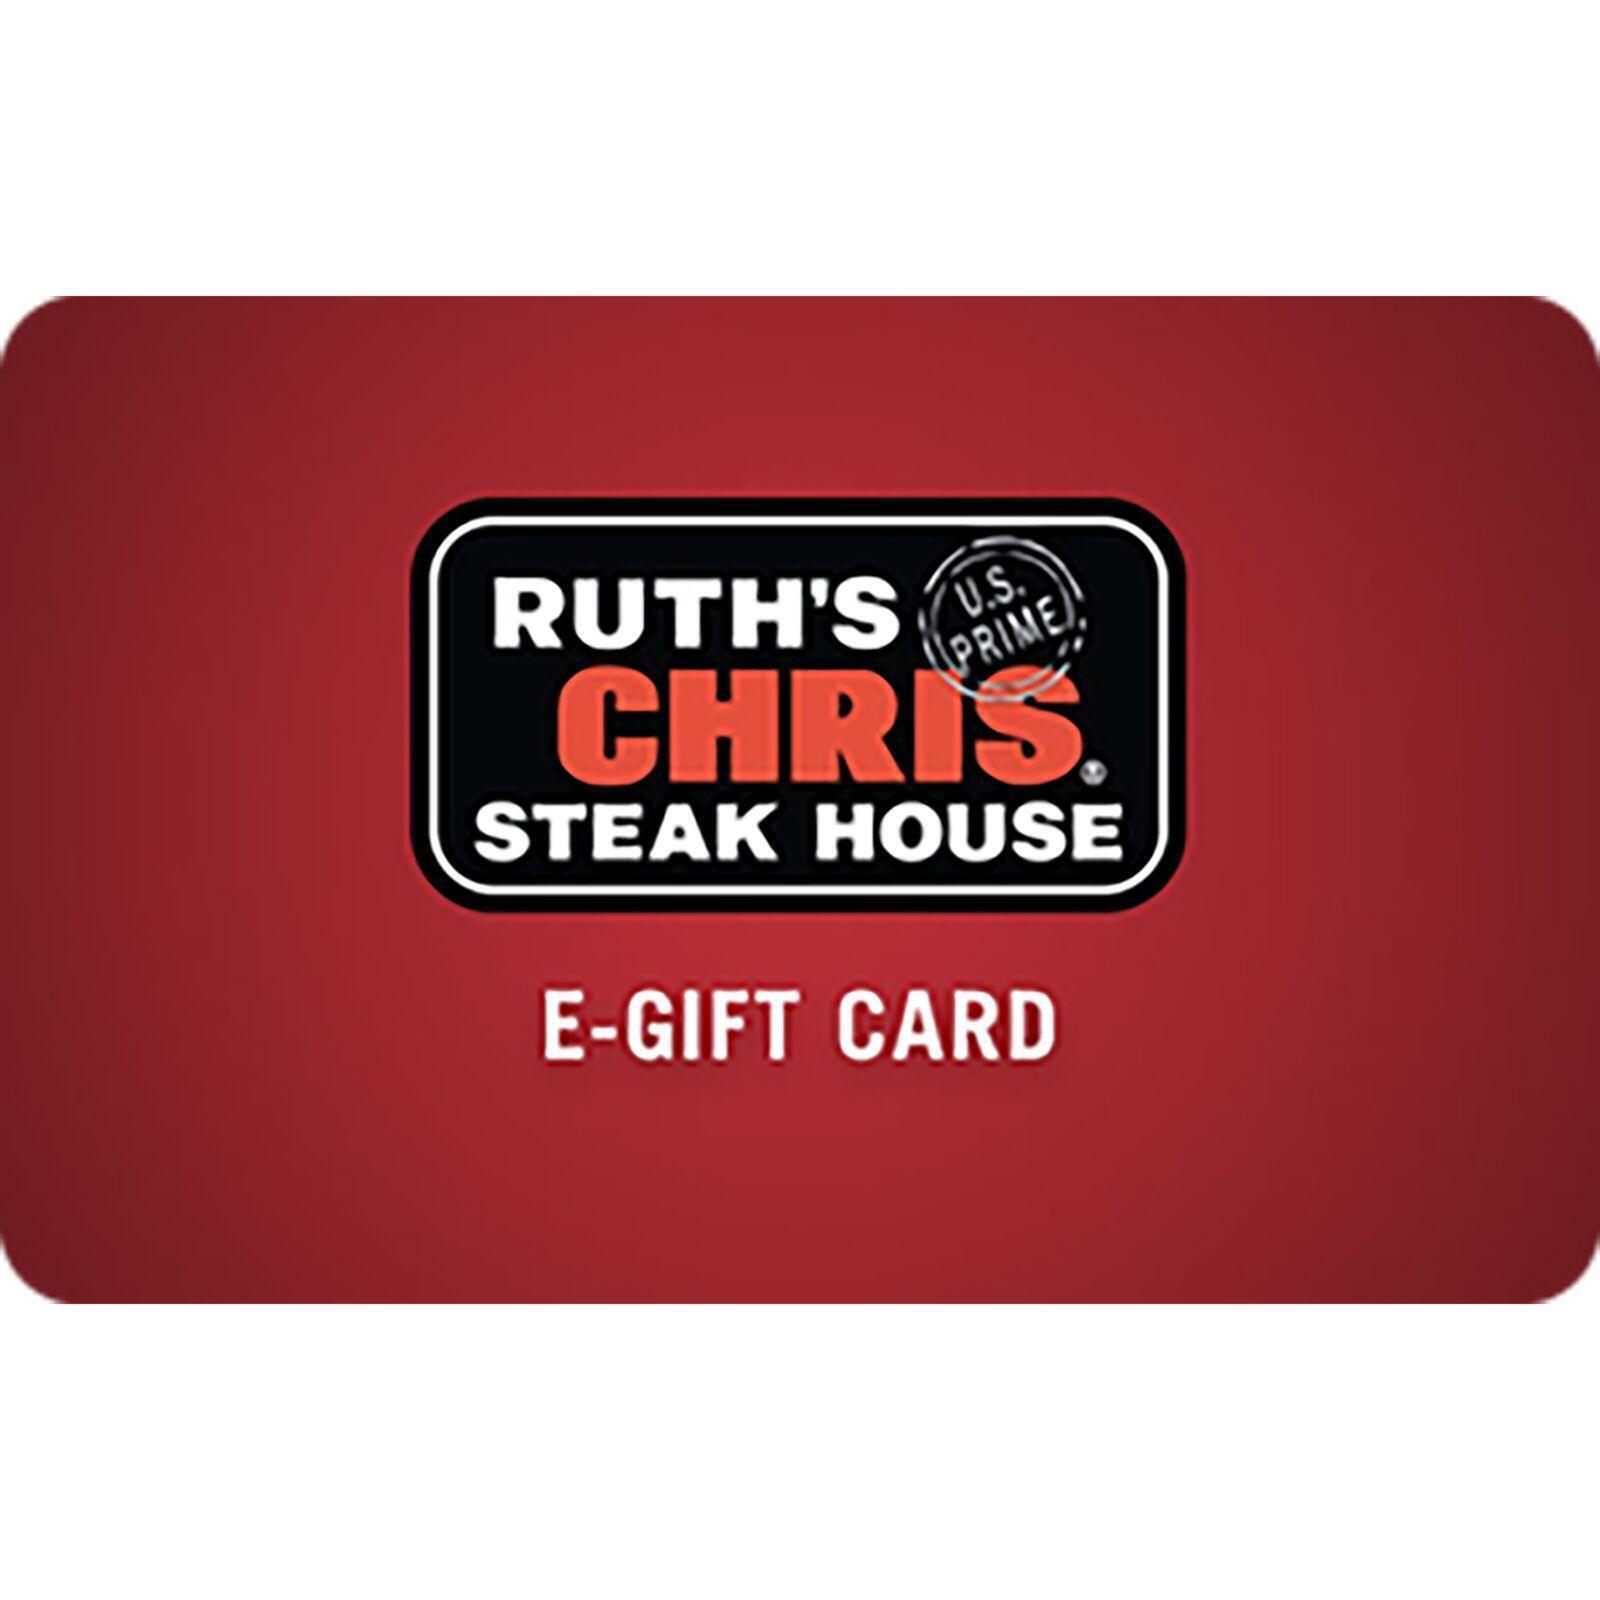 Ruth's Chris Steakhouse eGift Card (Email Delivery)